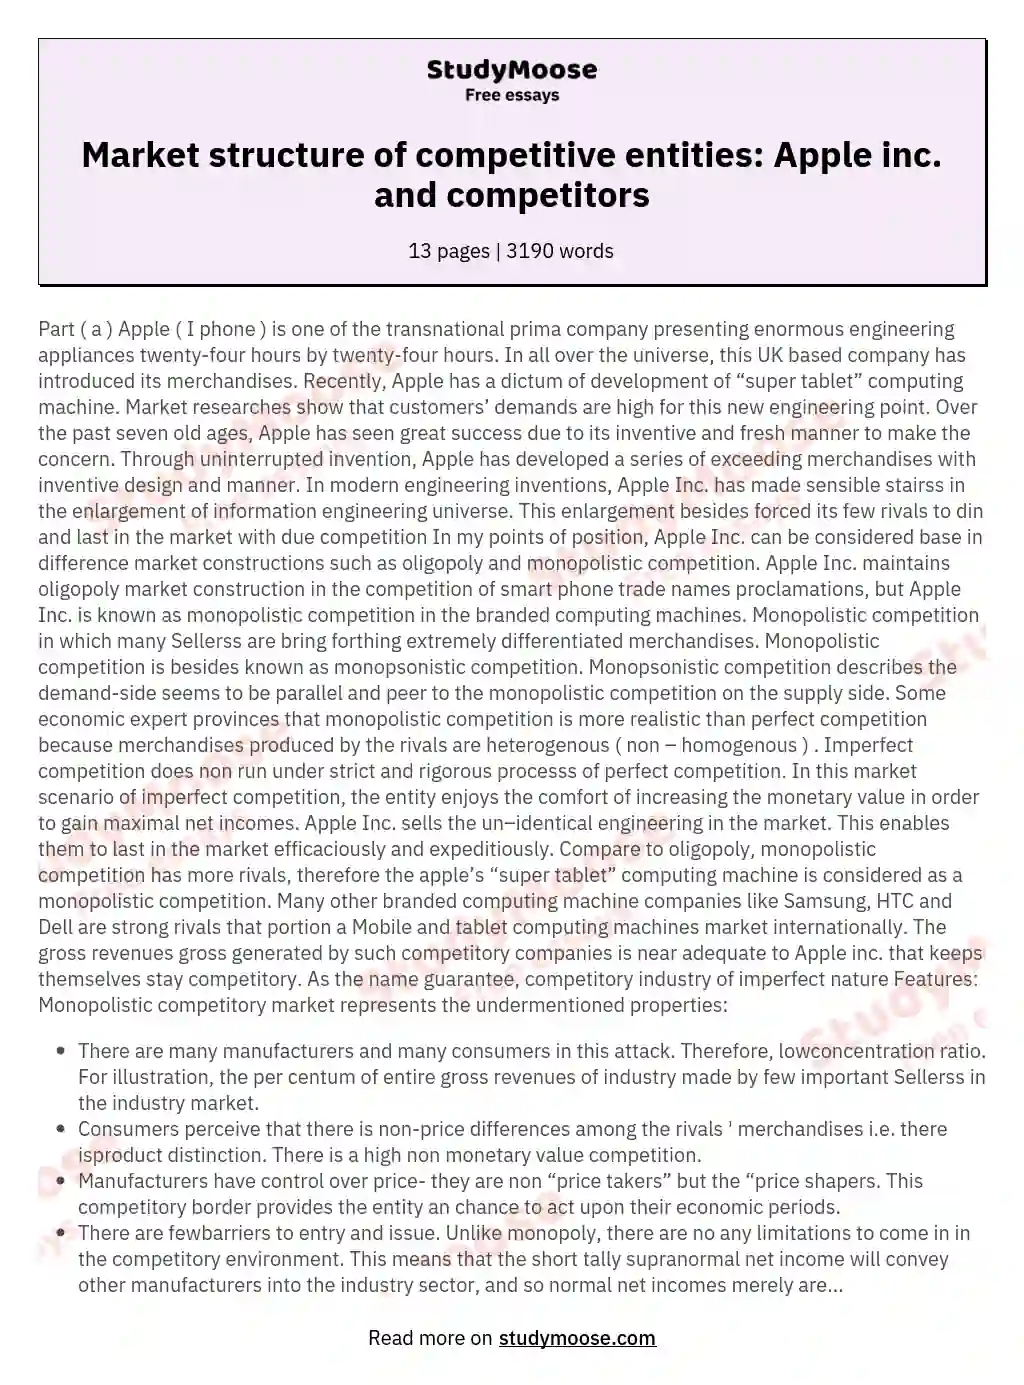 Market structure of competitive entities: Apple inc. and competitors